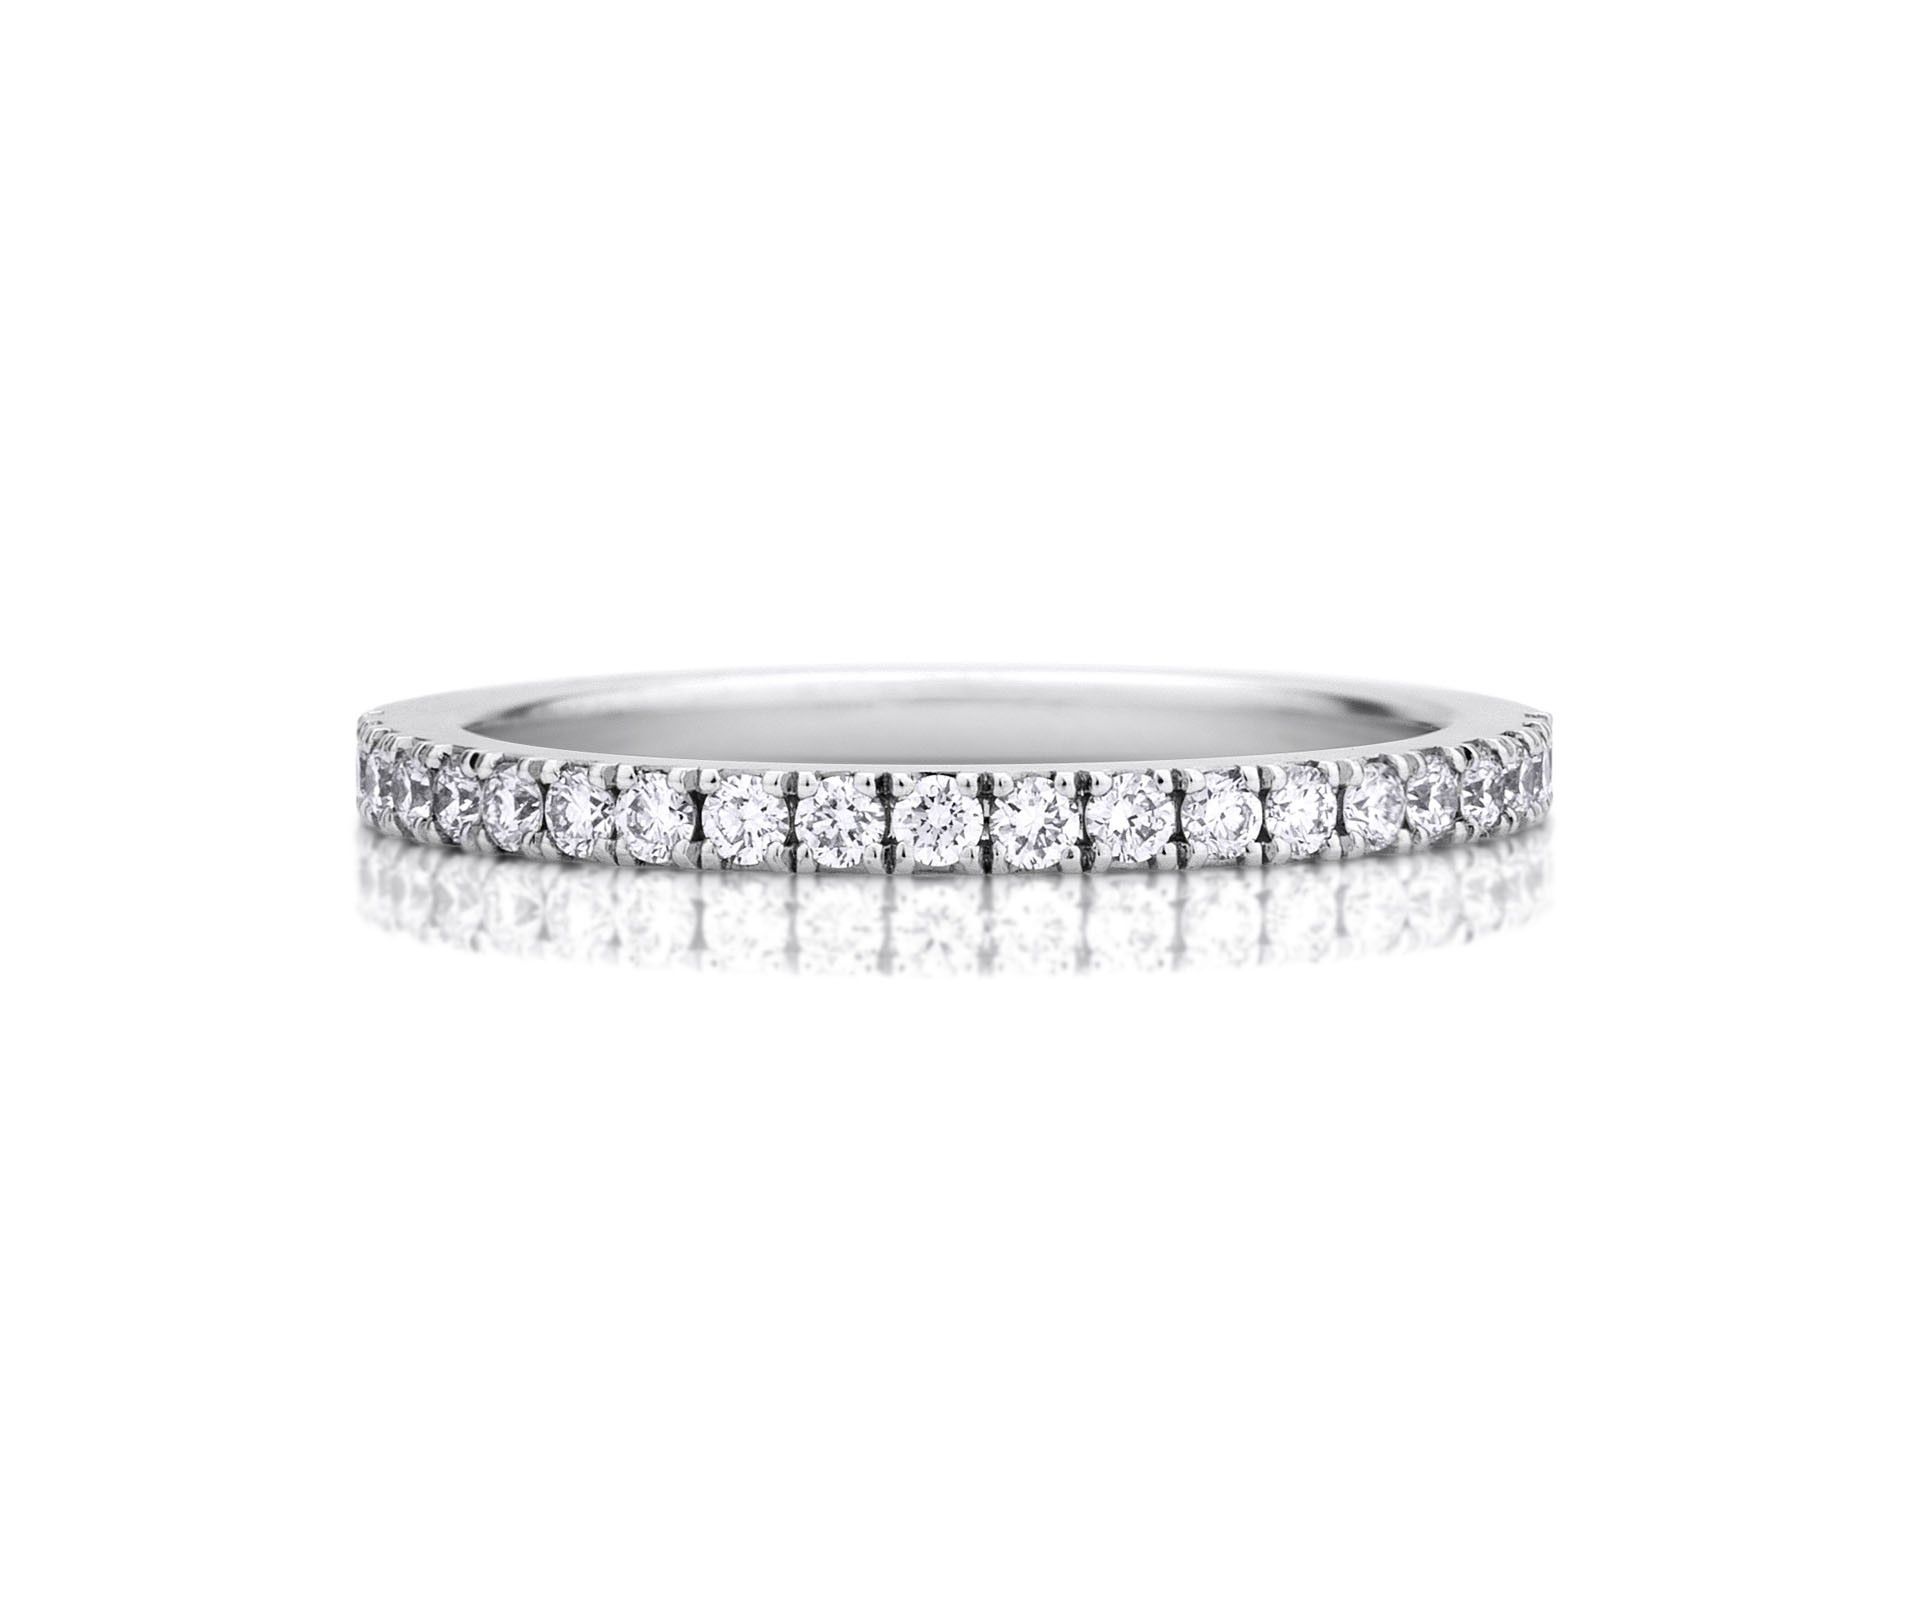 Diamond Wedding Bands | Wedding Rings For Women | De Beers Throughout Best And Newest Micropavé Diamond Large Wedding Bands (View 21 of 25)